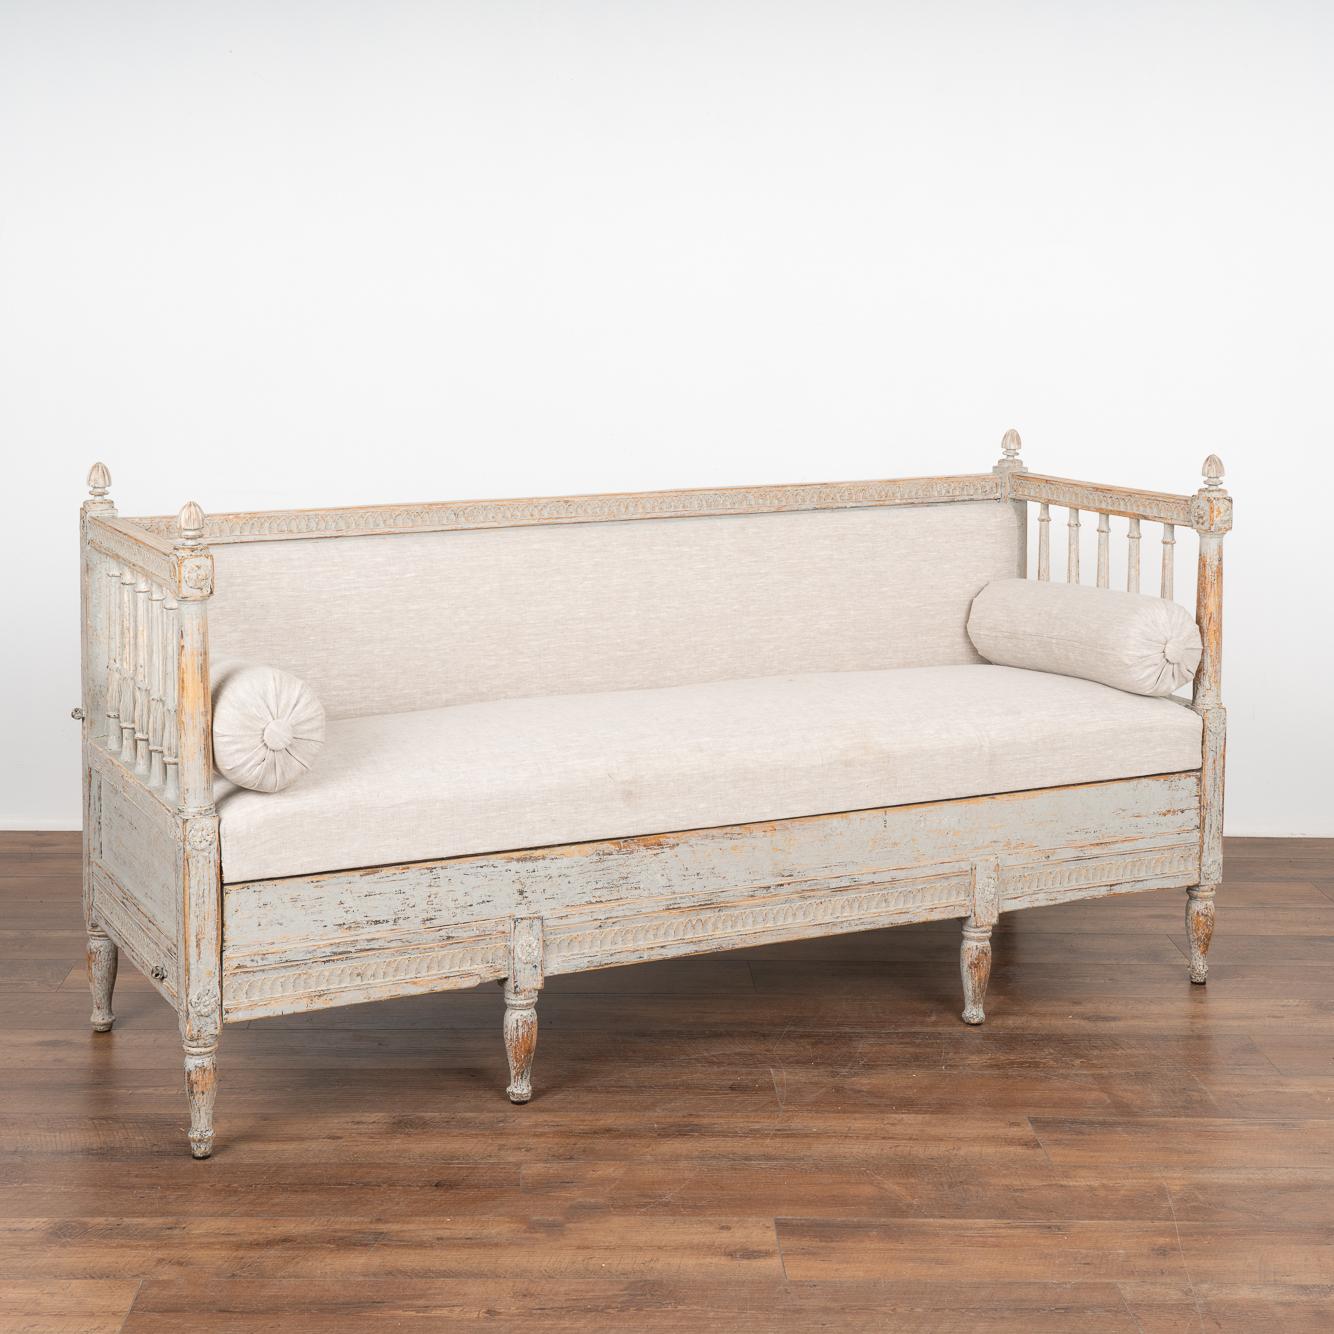 This exceptional Swedish Gustavian sofa or settee has exquisitely carved details along back and skirt with spindle back and sides, all raised on six turned feet.
Please enlarge and examine the close up photos to appreciate the light gray (with hints